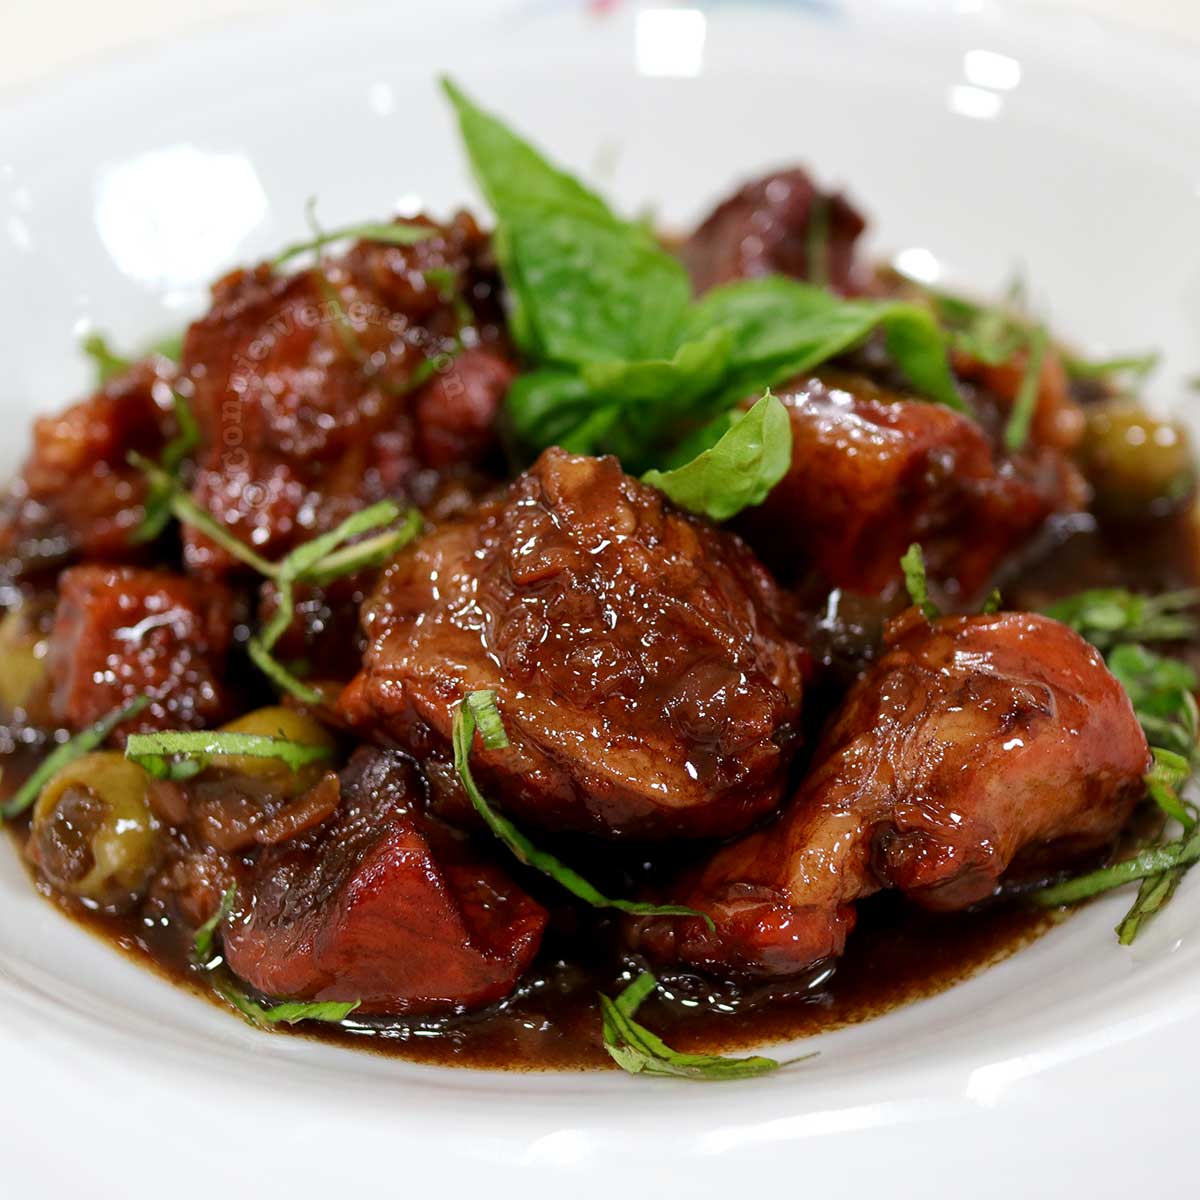 Italian-style sweet and sour pork stew (spezzatino agrodolce) garnished with basil